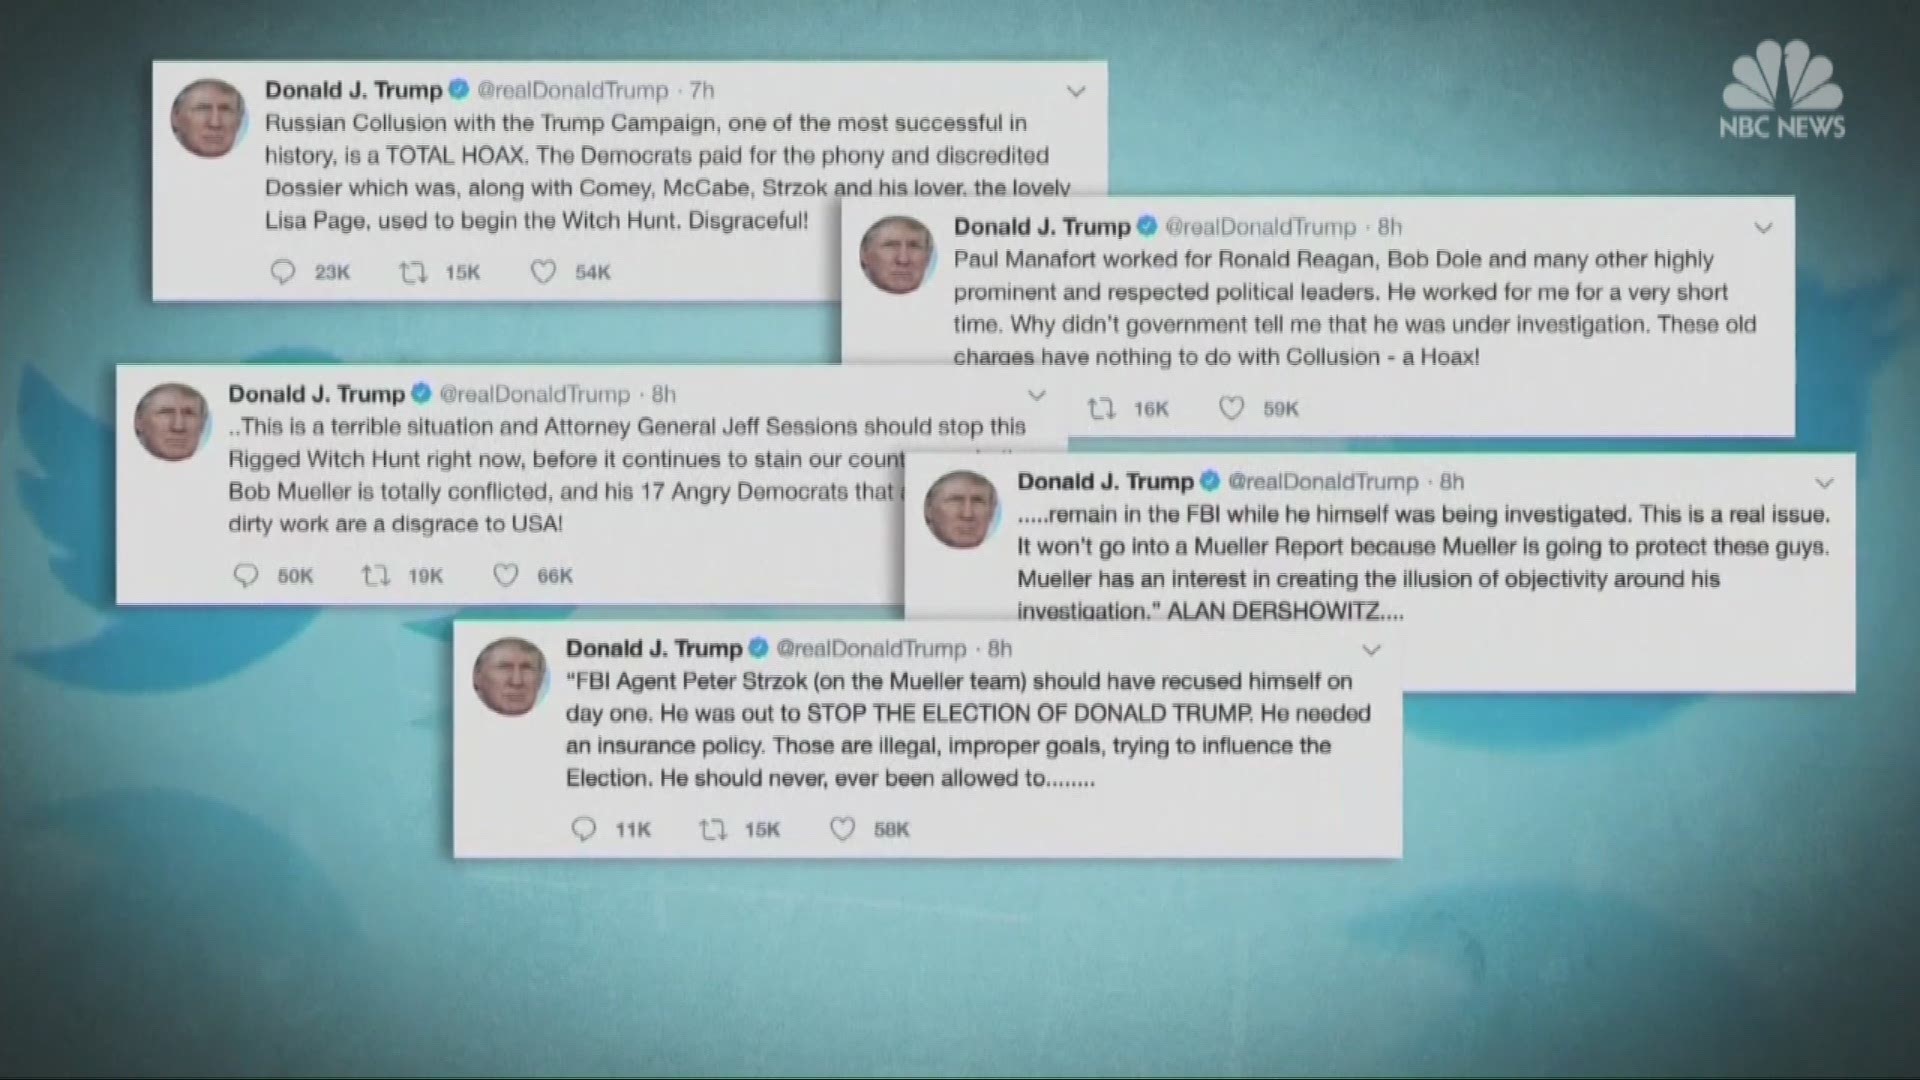 The New York Times reports that special counsel Robert Mueller's team is looking into the possibility that President Trump's tweets attacking their work could be considered obstruction of justice. NBC's Tracie Potts reports.